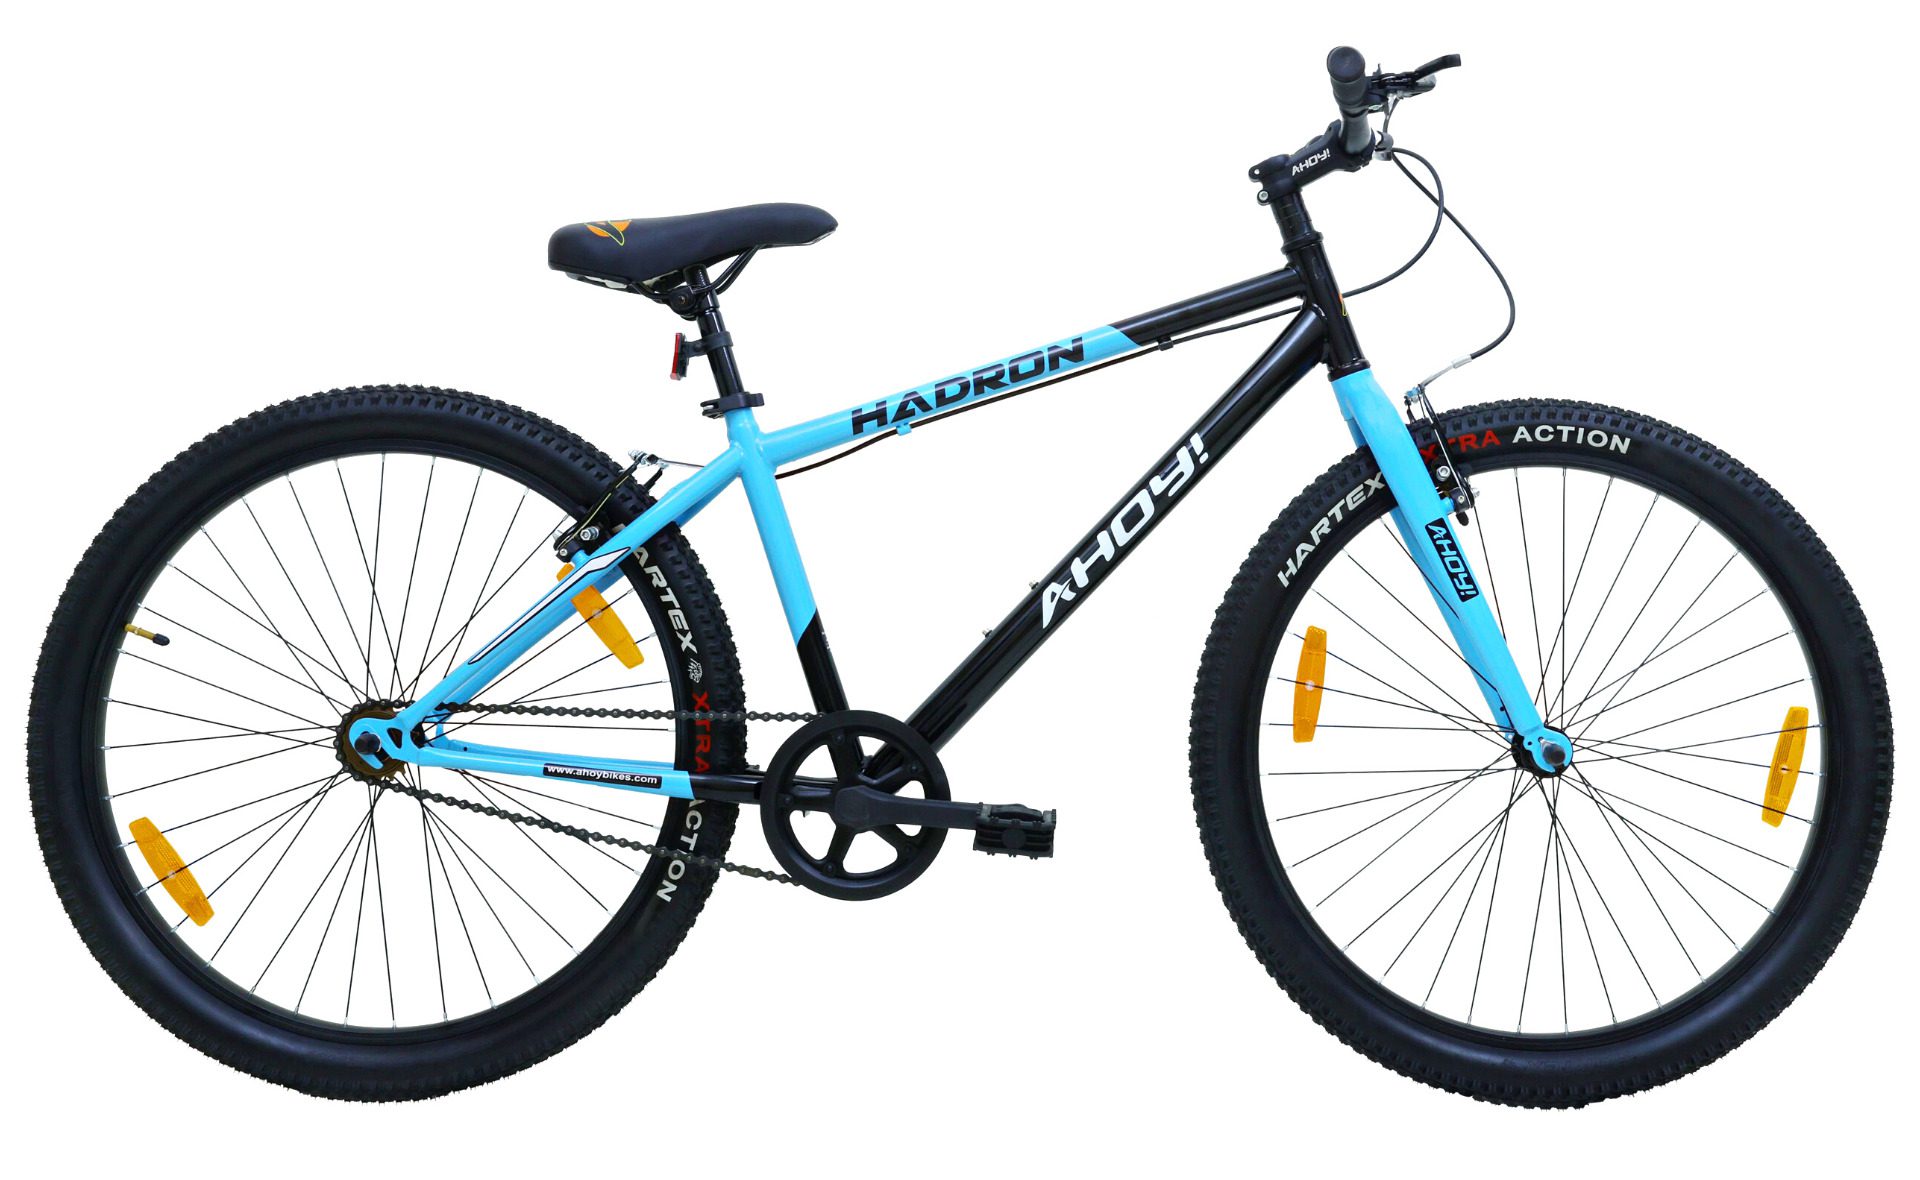 Hadron single speed bicycle 27.5T | buy blue non gear bike for men